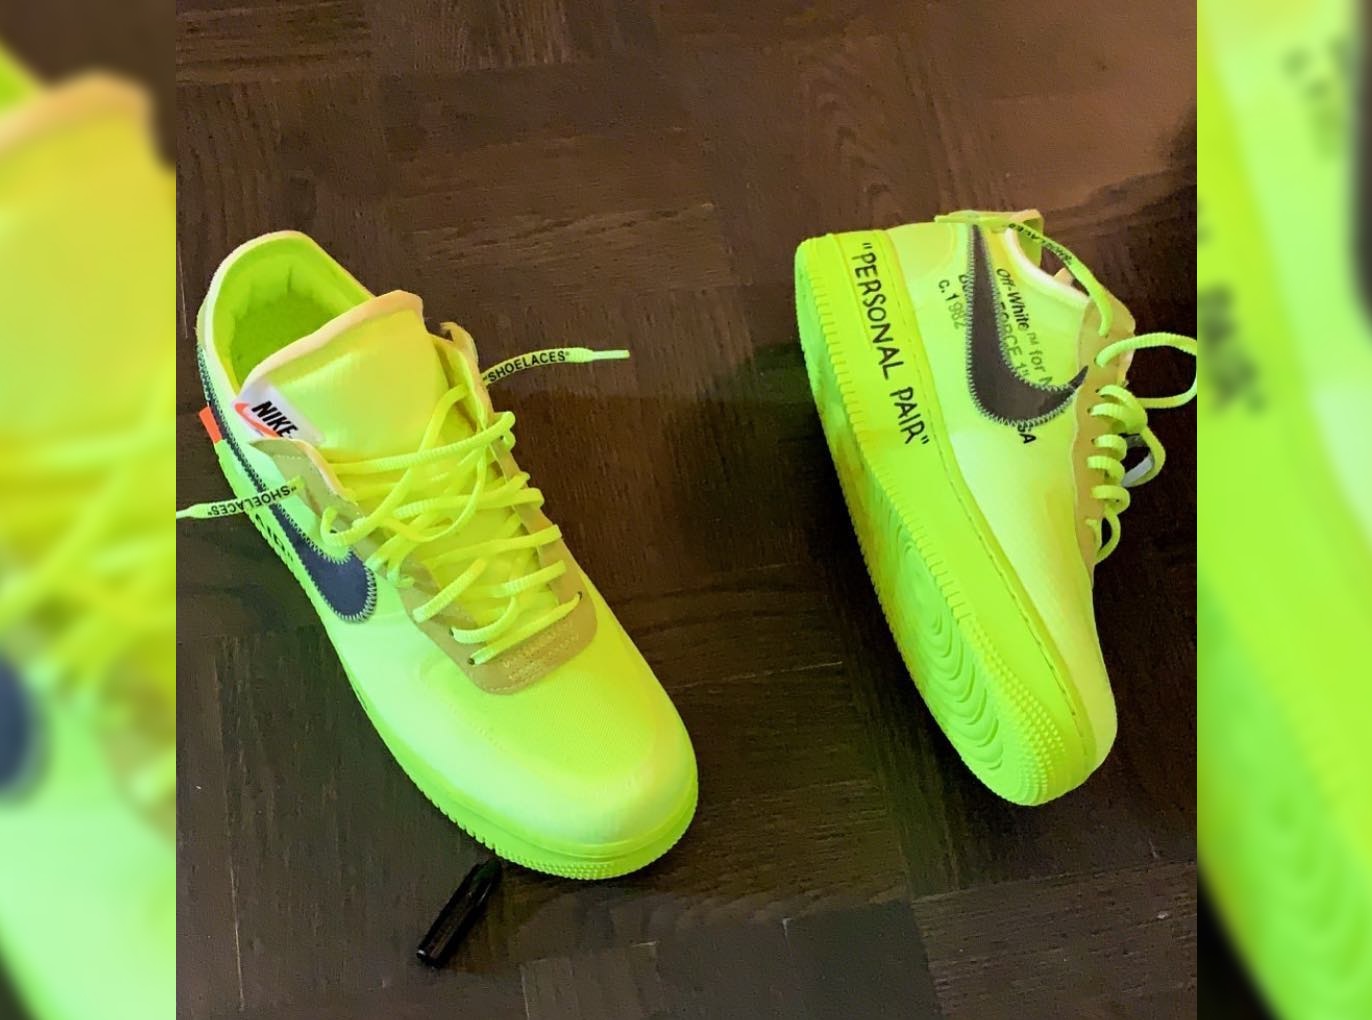 Take a Look at Virgil Abloh’s Personal Pair of “Volt” OFF WHITE x Nike Air Force 1s